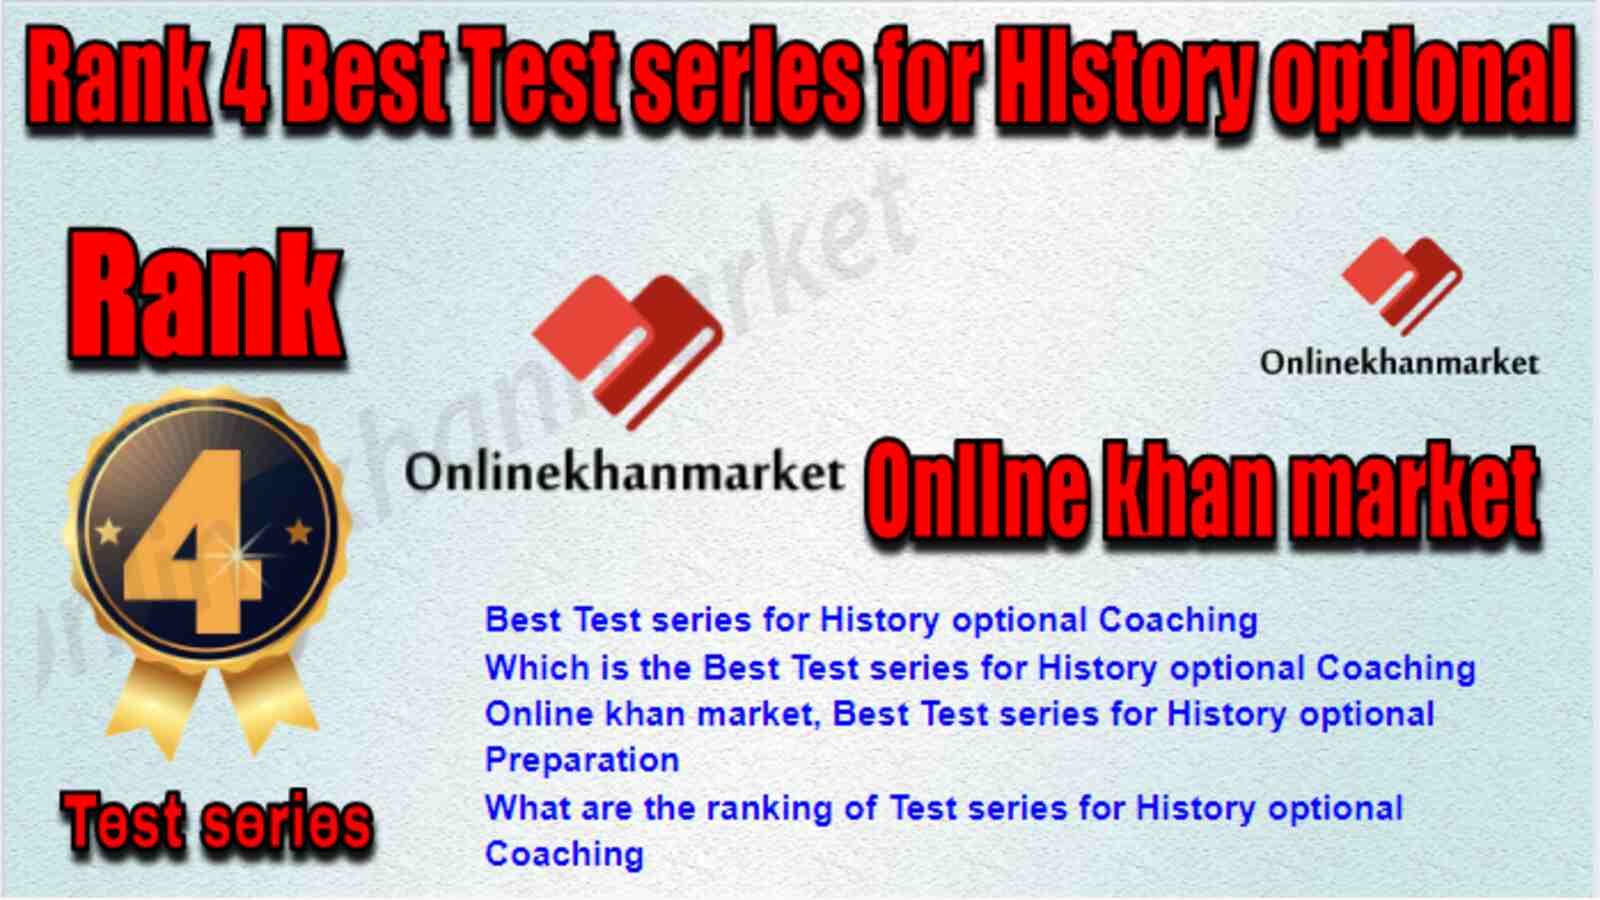 Rank 4 Best Test series for History optional